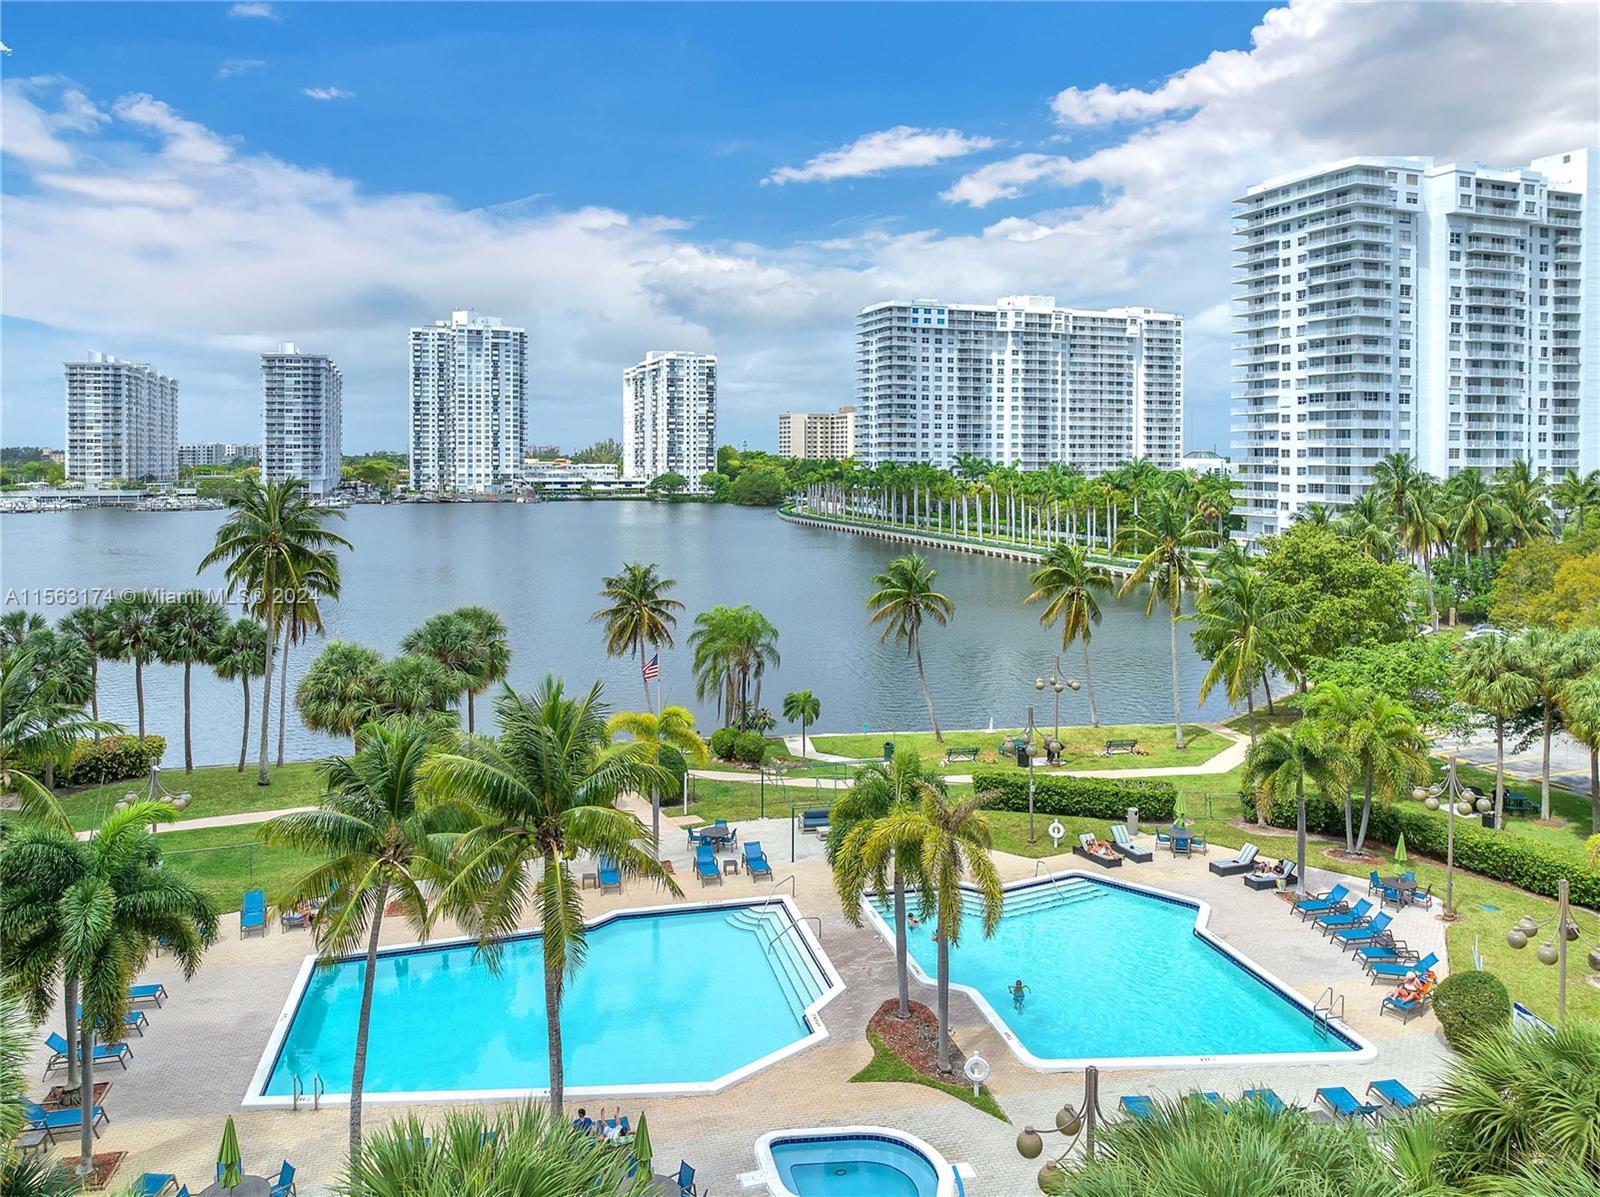 BEST LUXURY FINISHING IN AVENTURA - Biscayne Cove Condo offers an exquisite selection of luxury apar